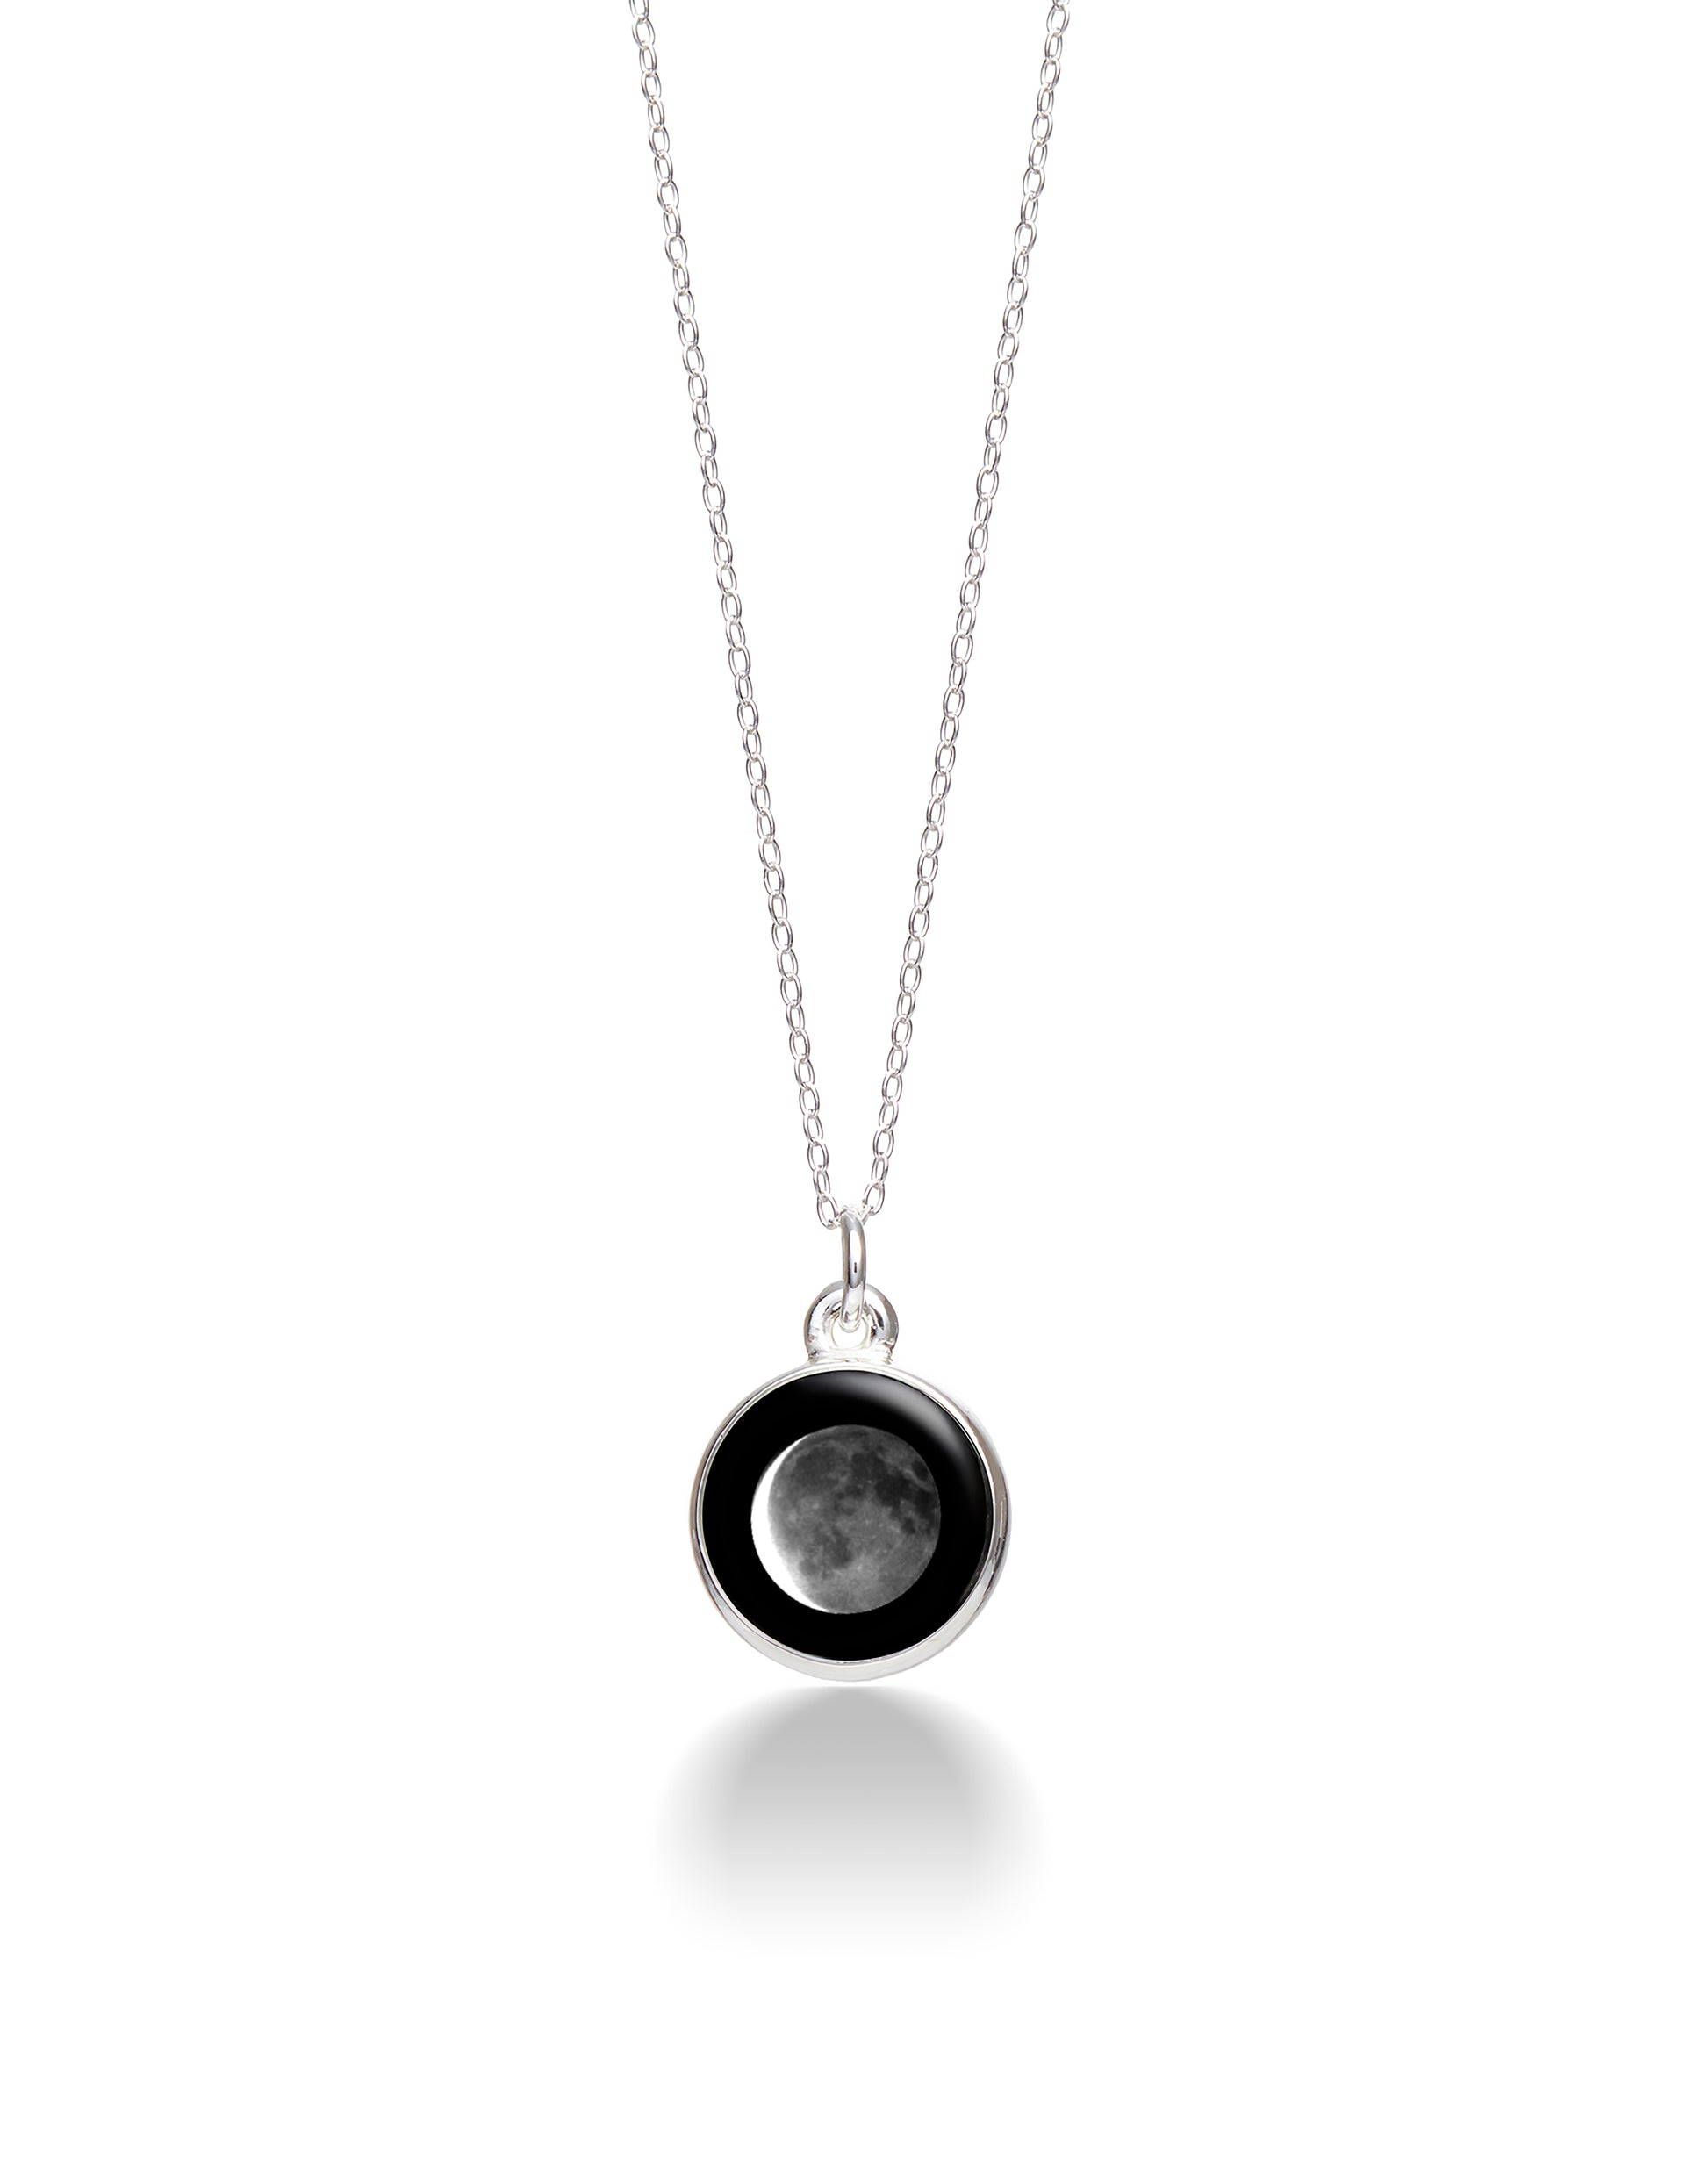 Moonglow Charmed Simplicity Necklace